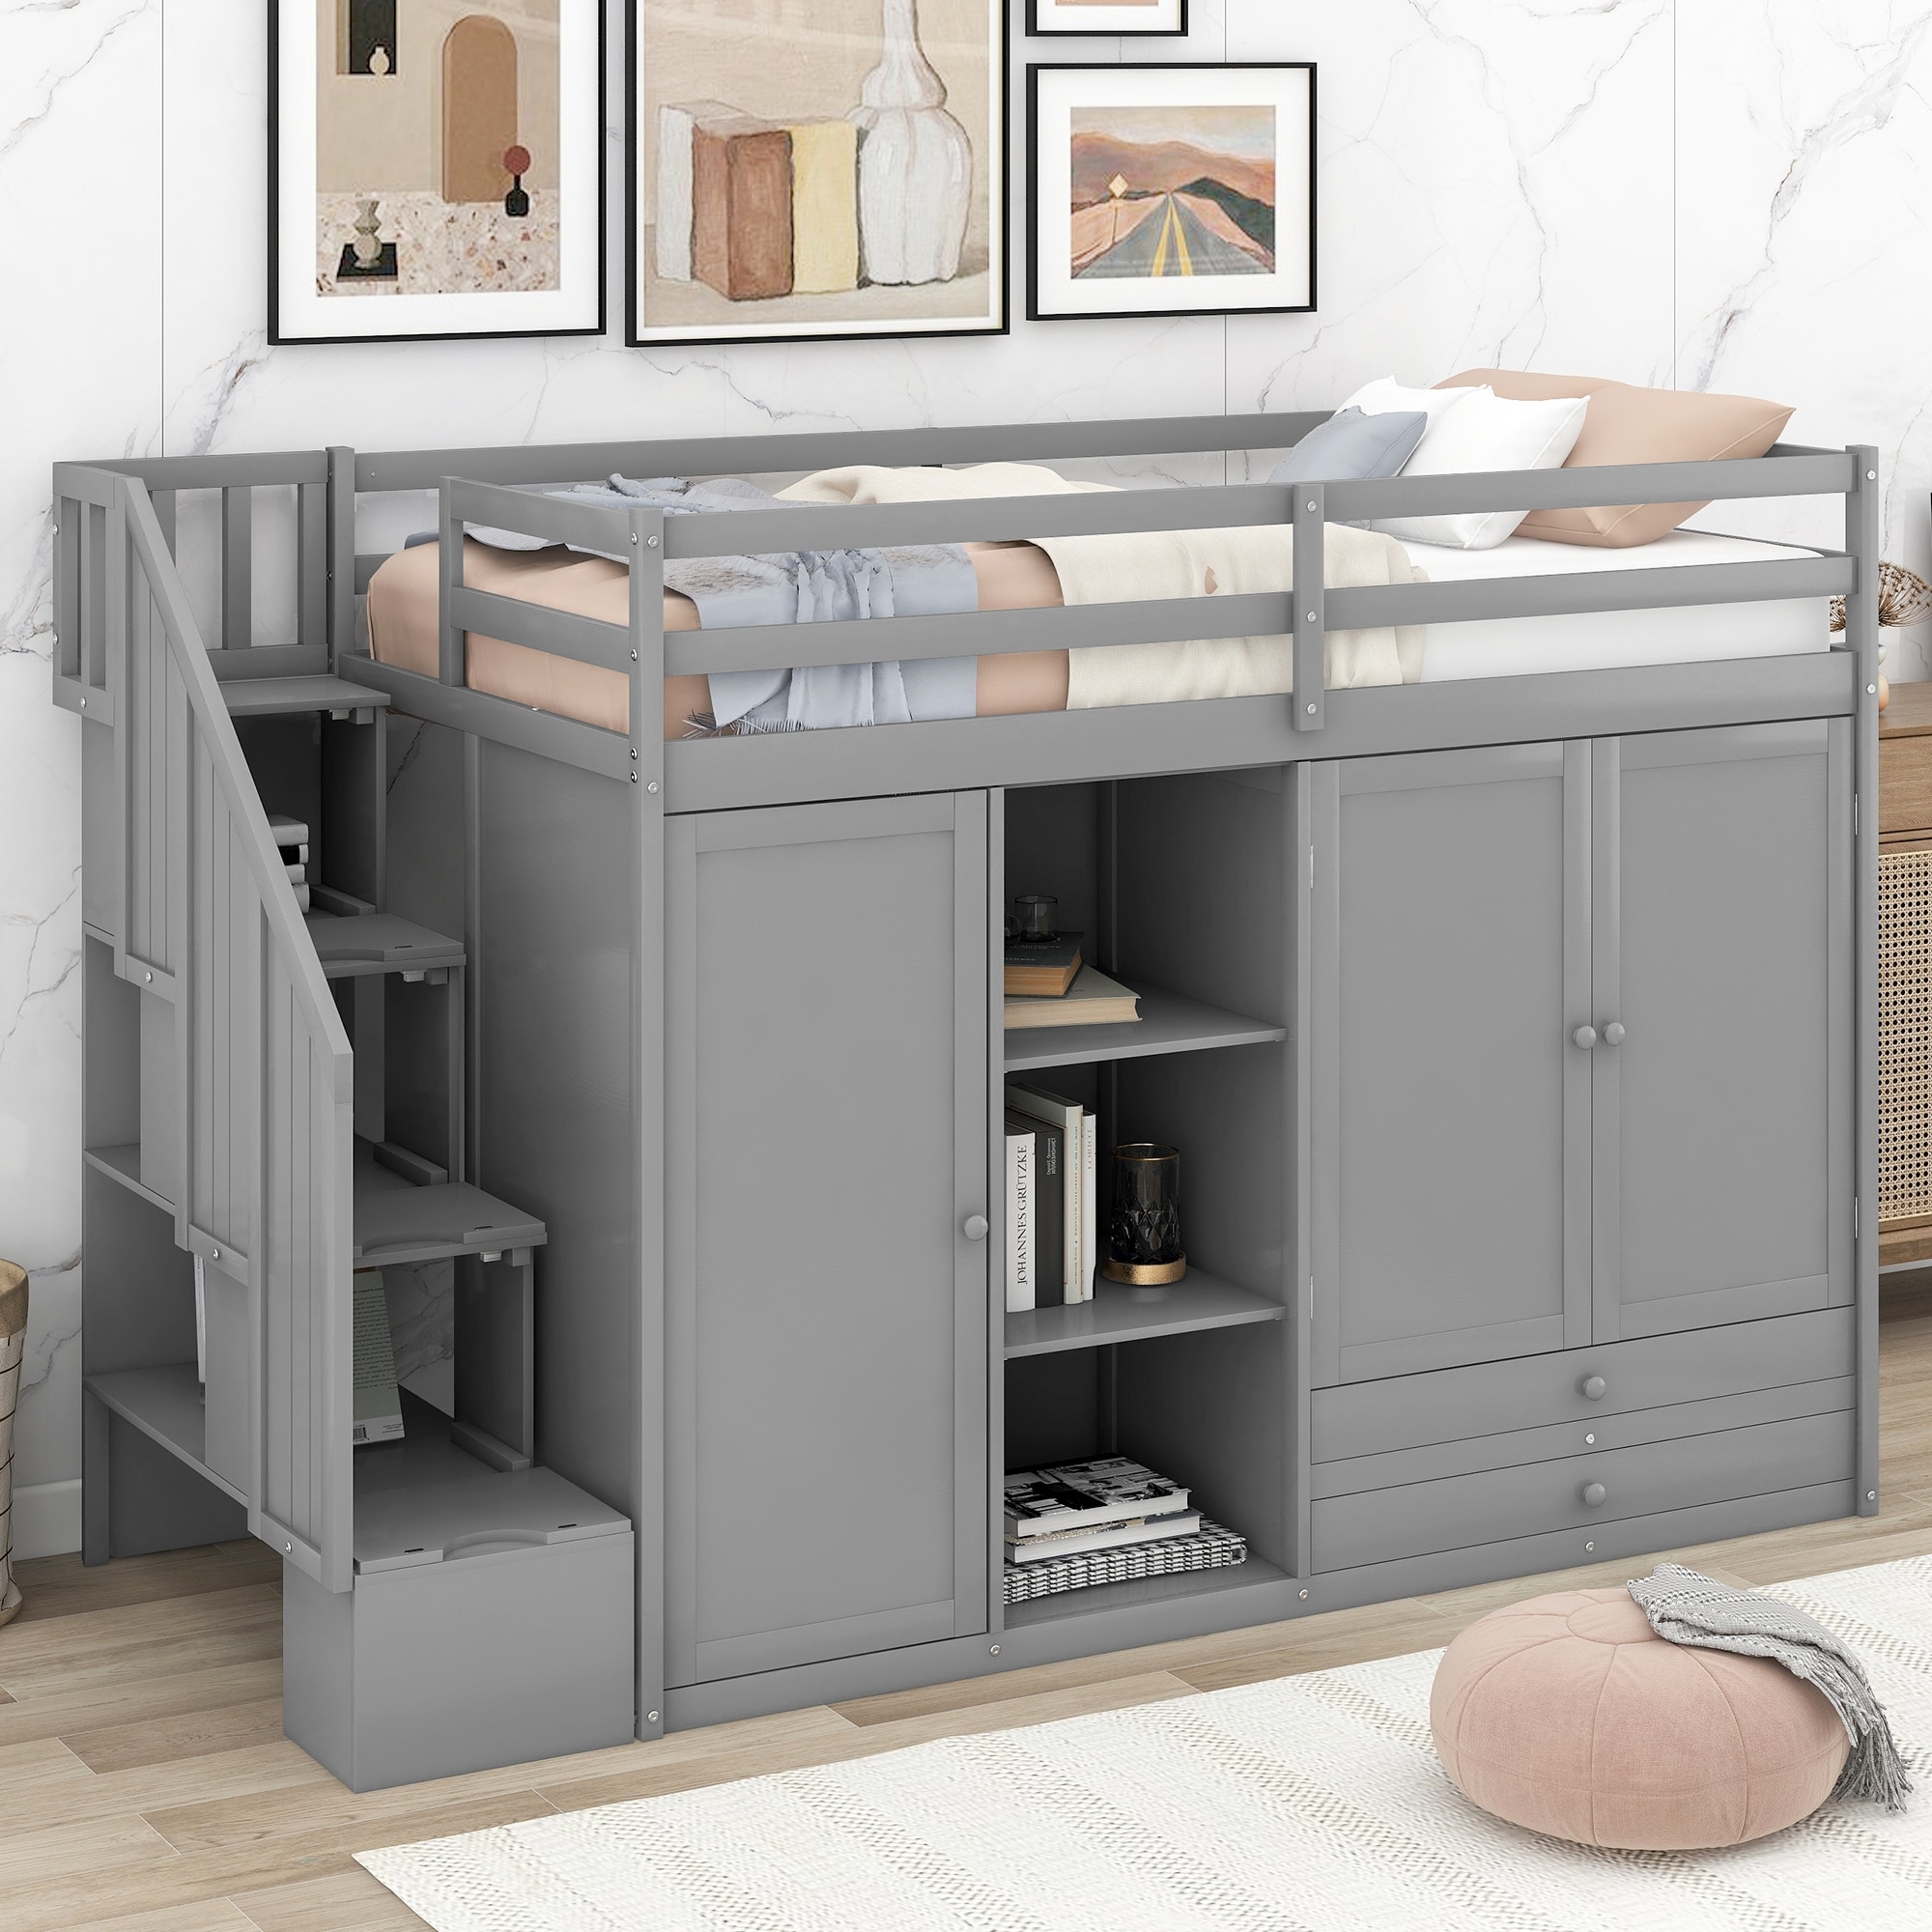 https://ak1.ostkcdn.com/images/products/is/images/direct/f854ecae9ec559ee23ddadc046a4d8eca56685a1/Space-Saving-Twin-Size-Loft-Bed-with-Storage-Wardrobes%2C-Drawers%2C-Shelves%2C-and-Staircase-for-Small-Living-Rooms.jpg